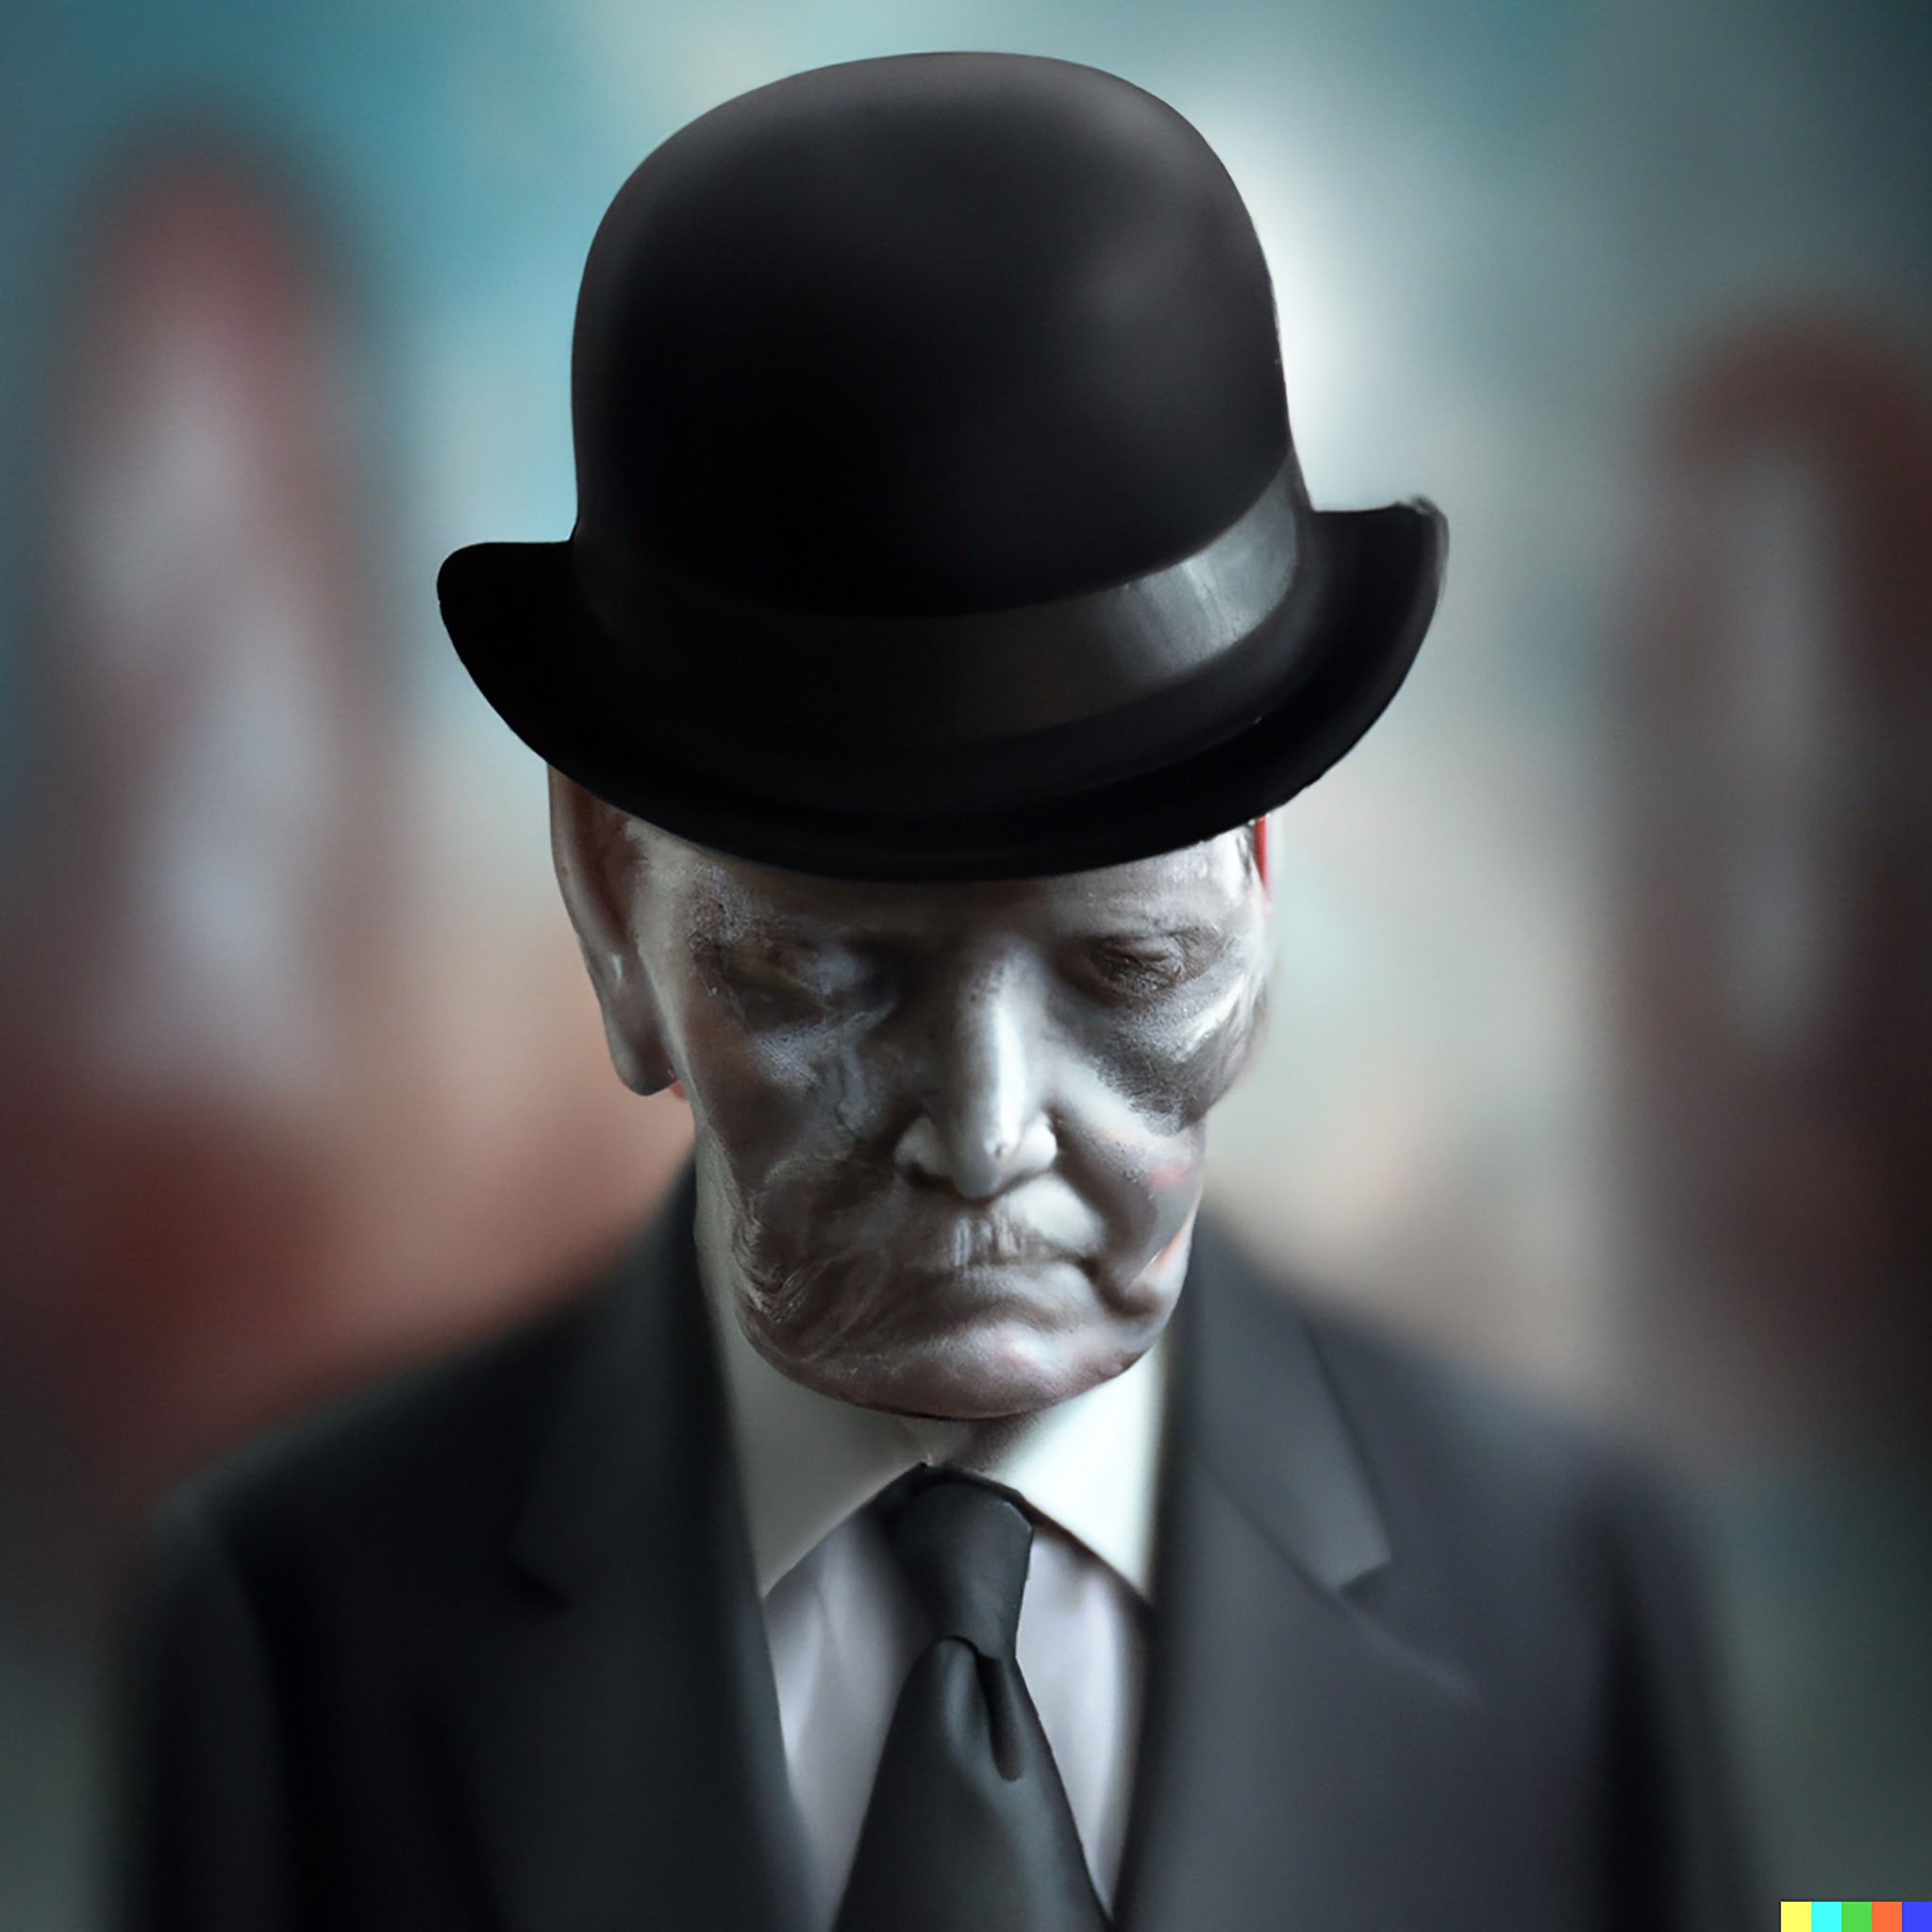 scary-old-man-with-no-face-and-a-black-hat-in-a-suit-2